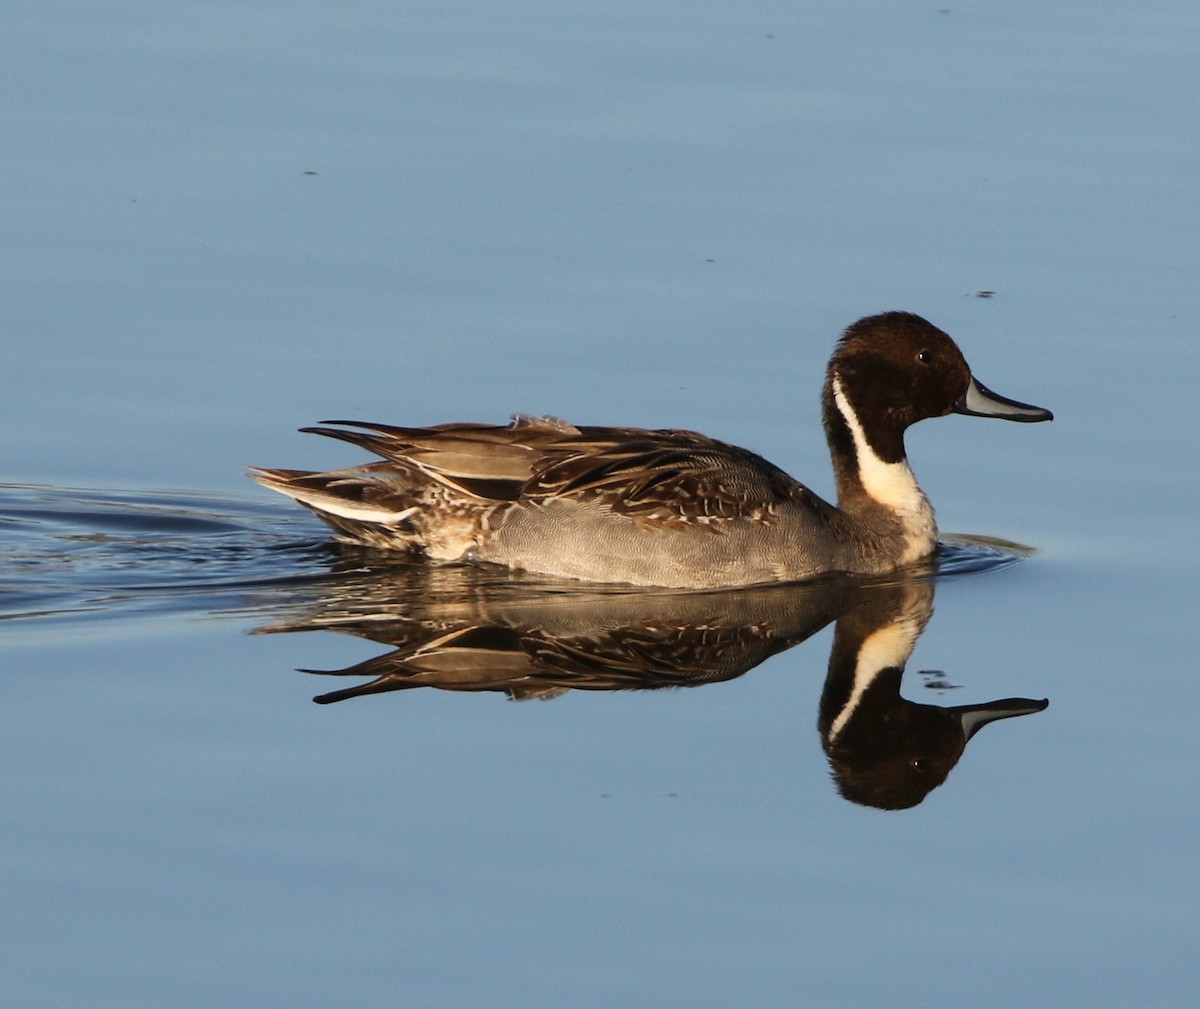 Northern Pintail - Mike "mlovest" Miller